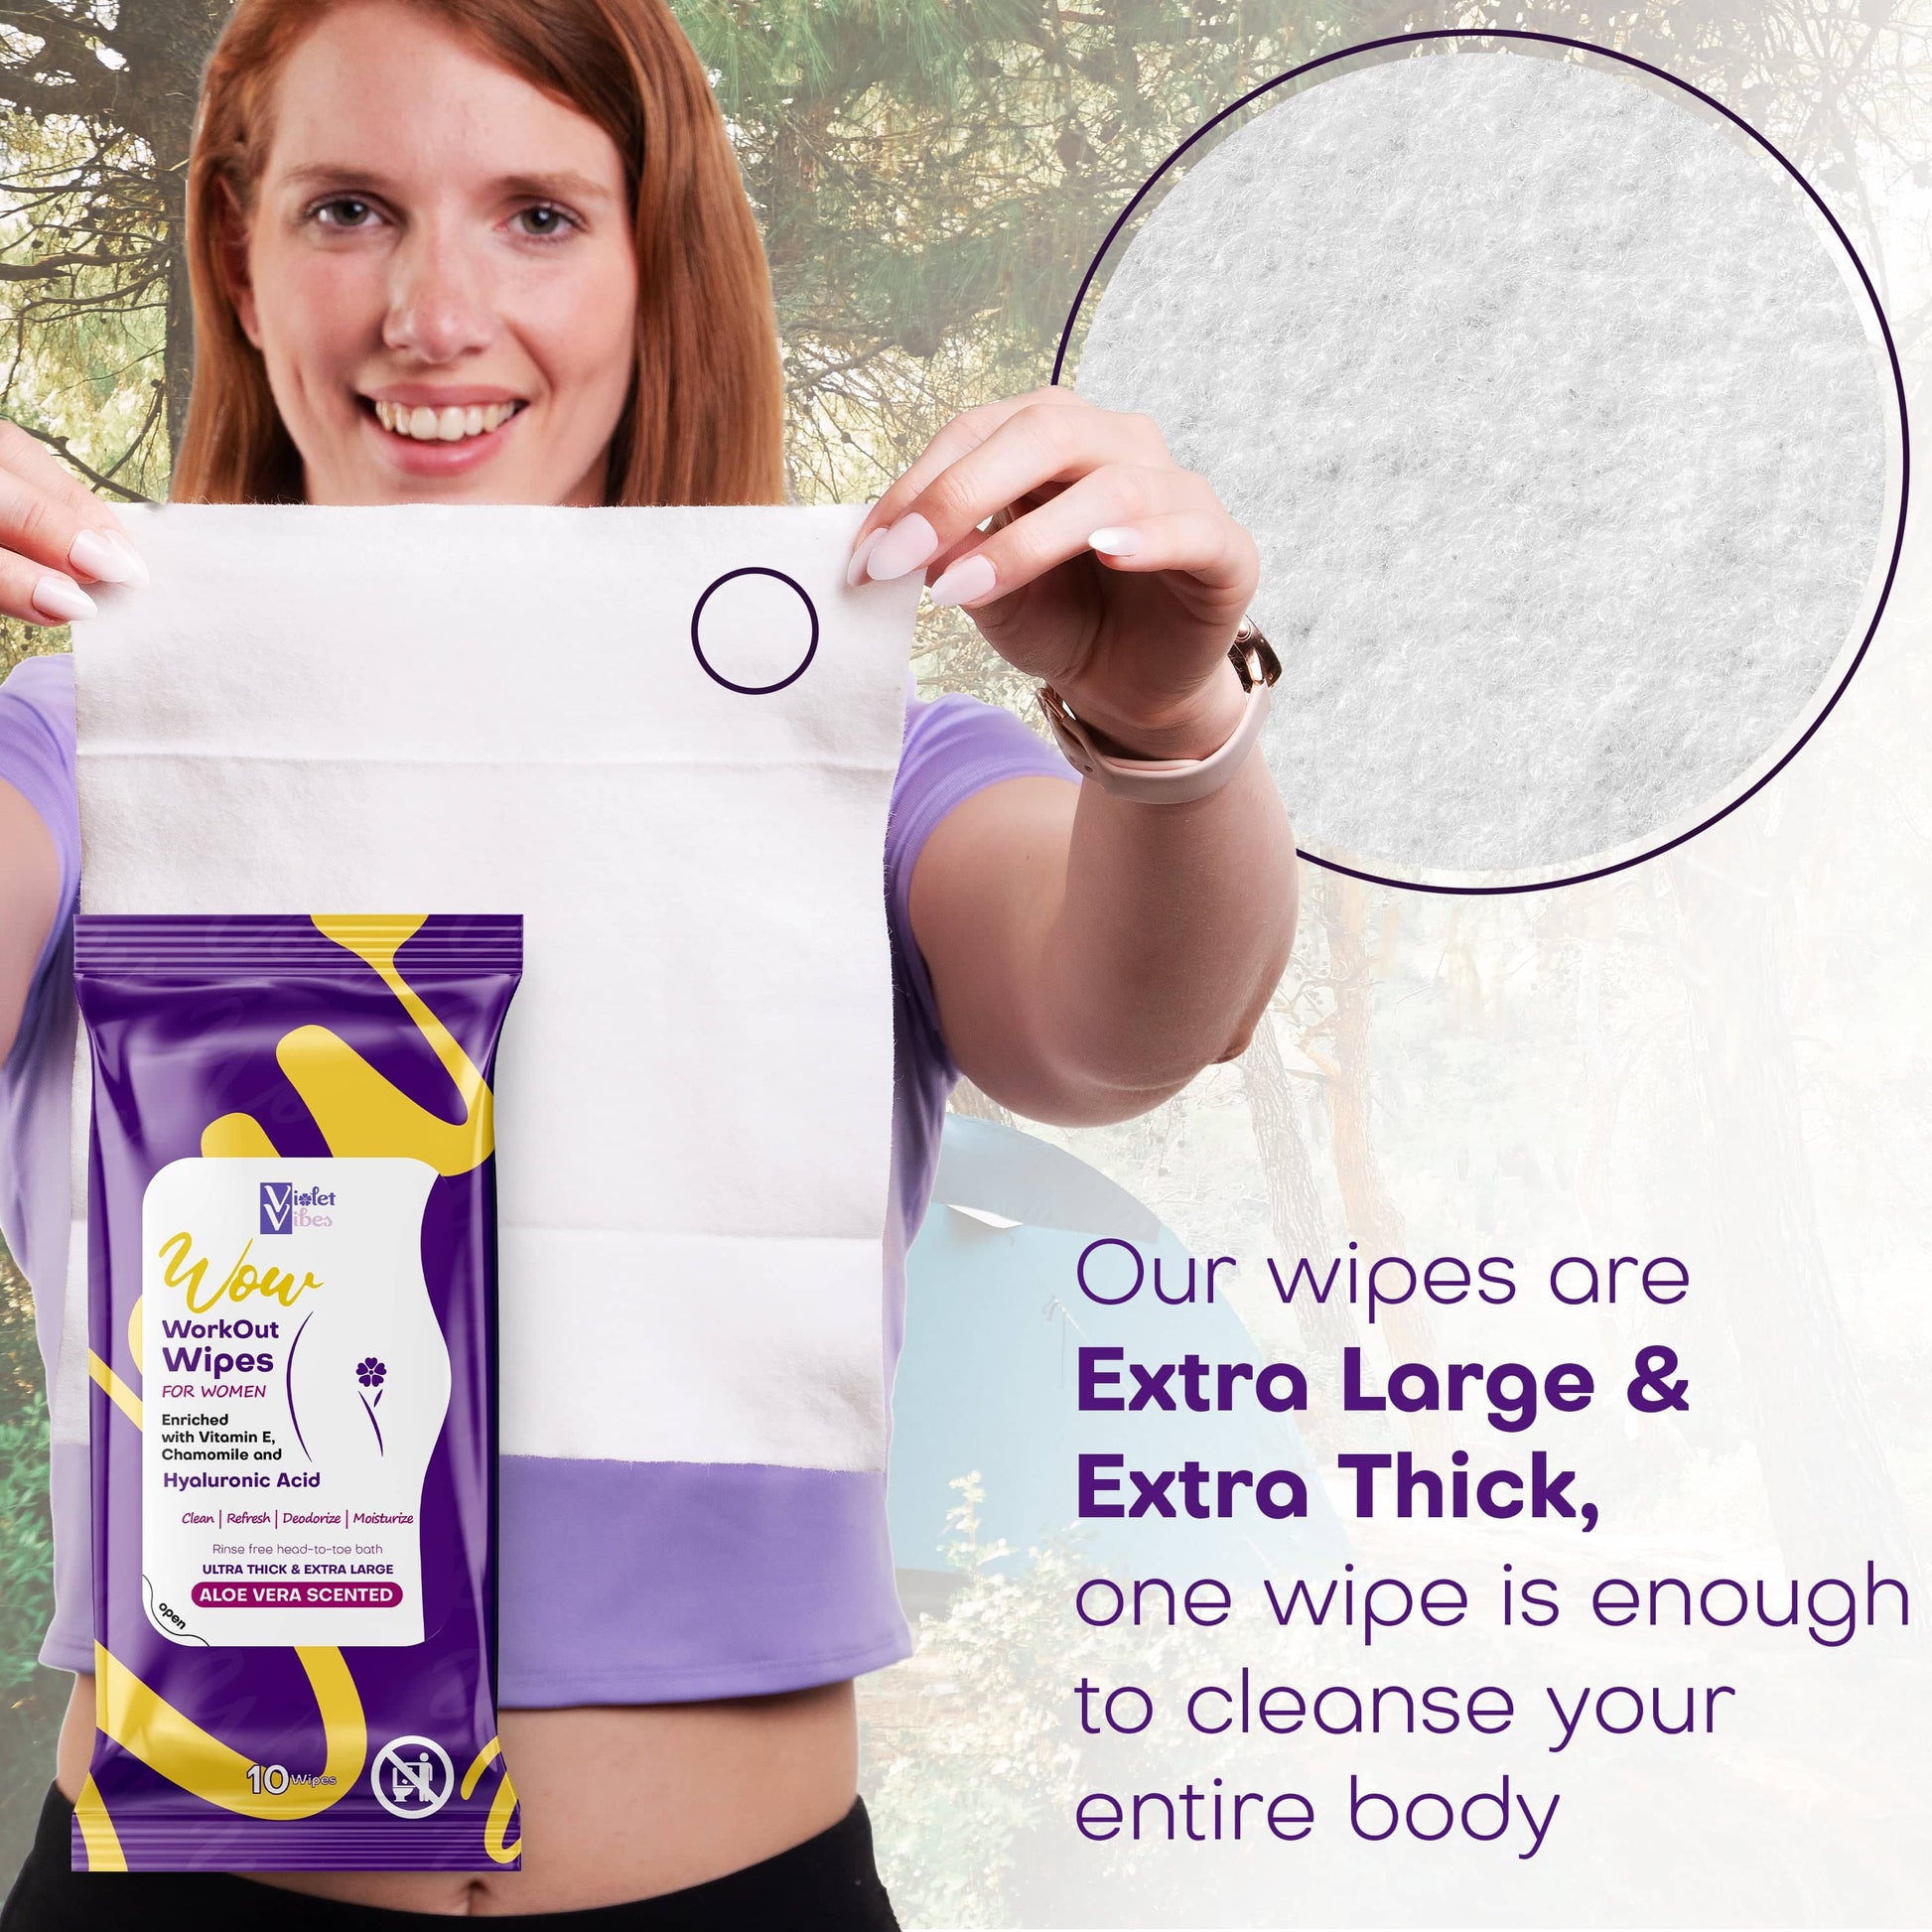 Work Out Wipes for Women - Unscented 2 Pack